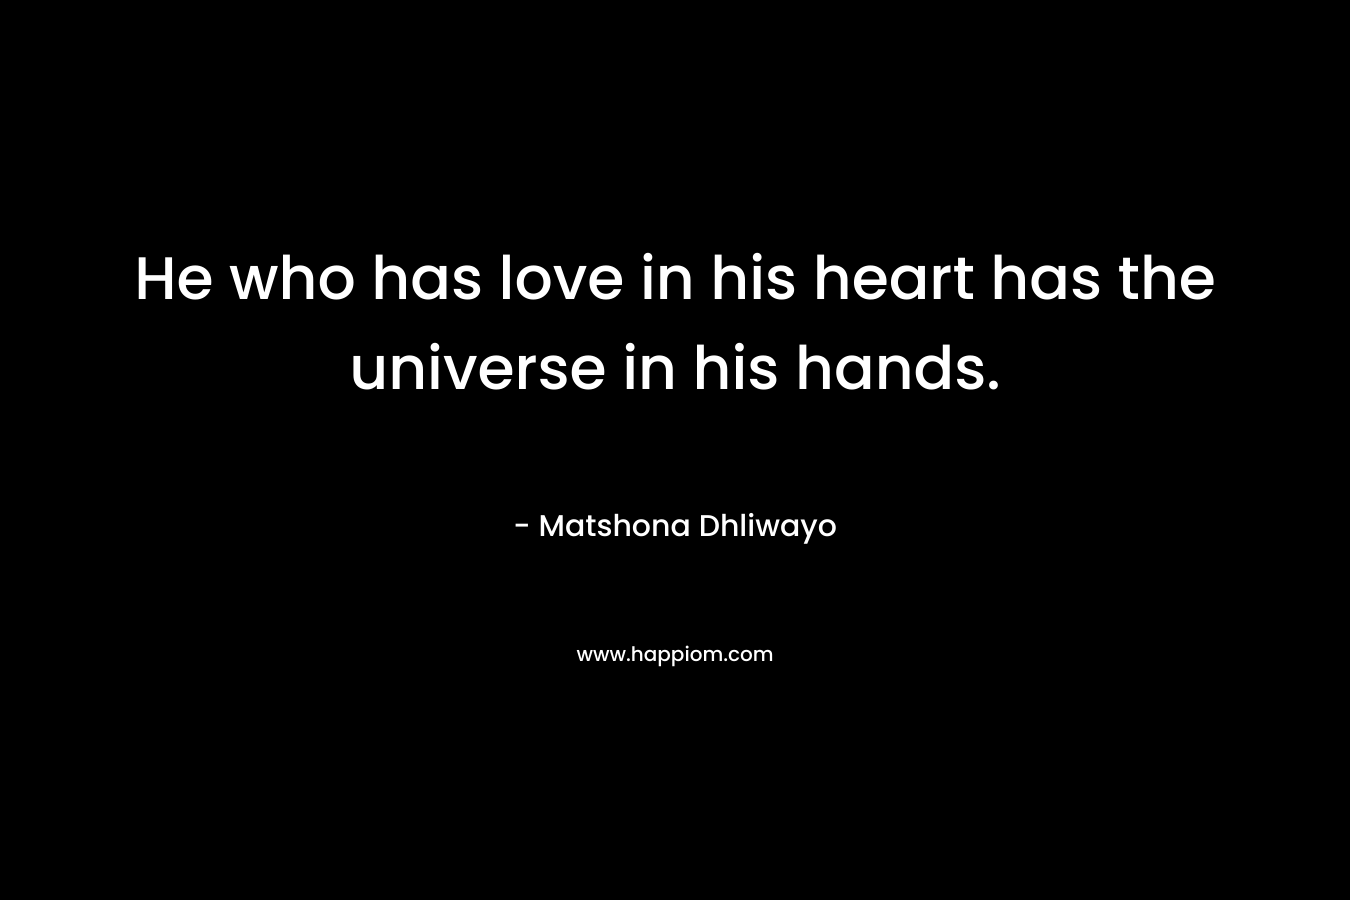 He who has love in his heart has the universe in his hands. – Matshona Dhliwayo